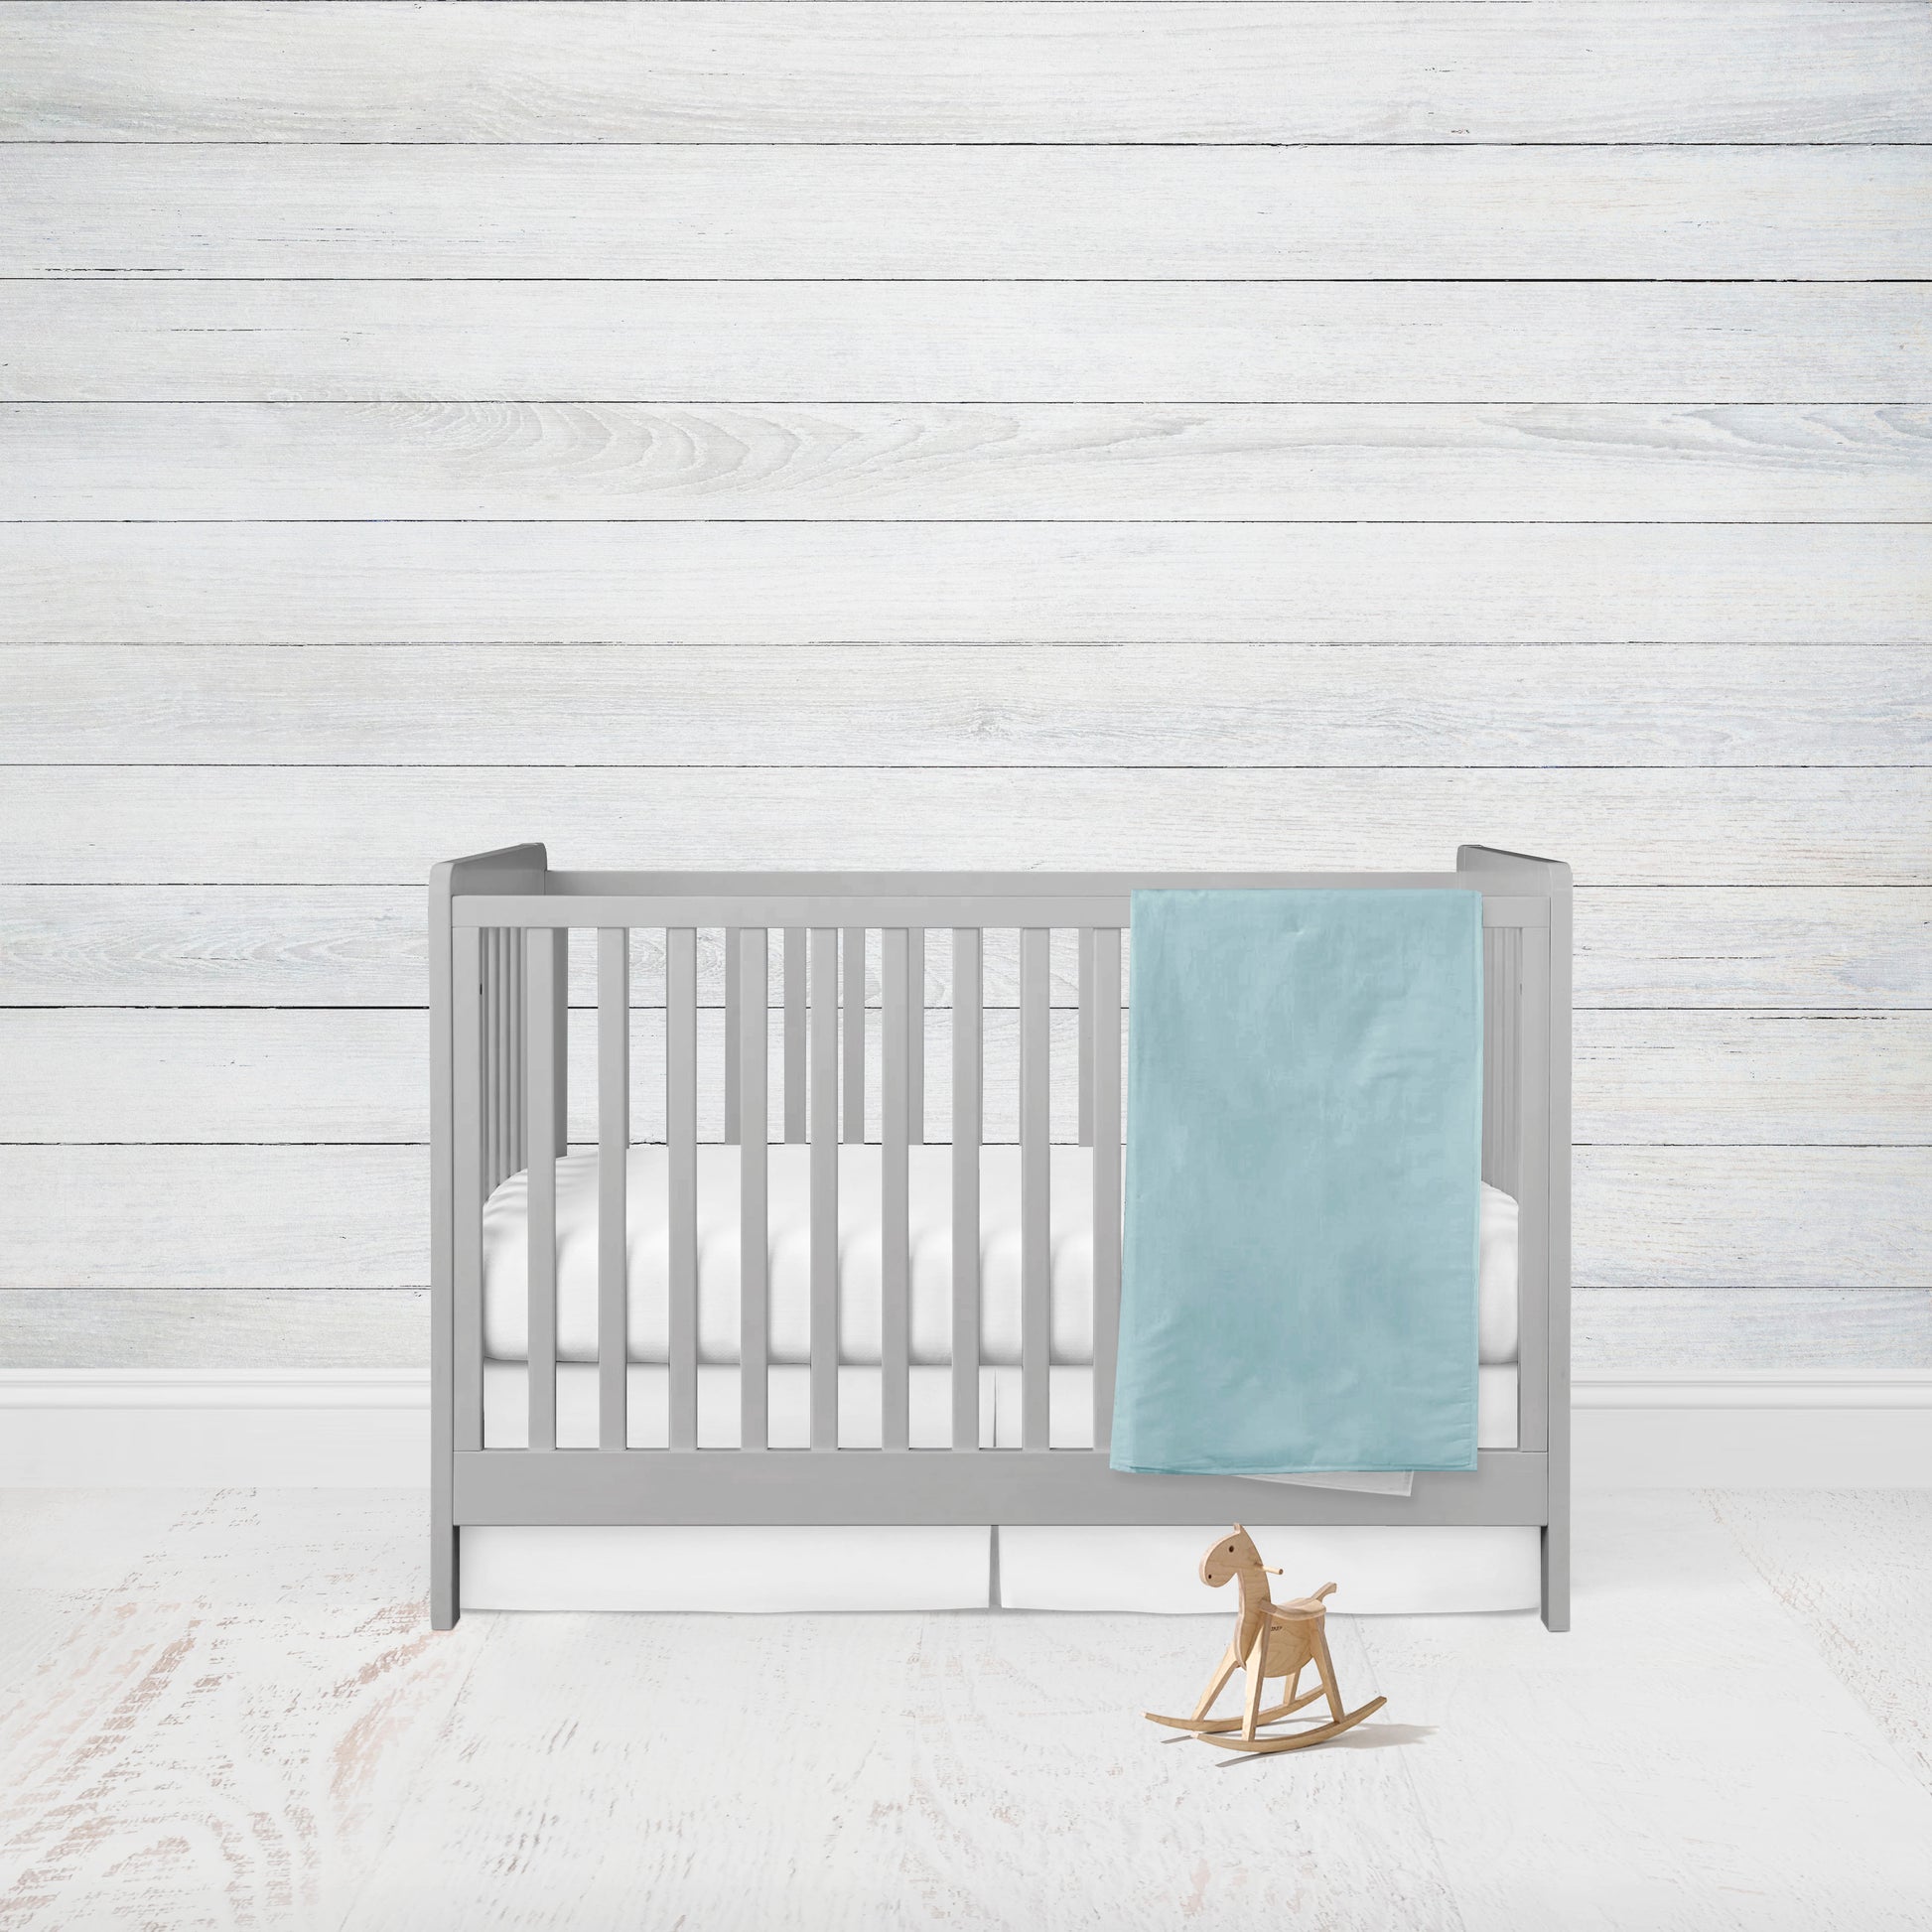 aqua blanket shown with white minky back hanging on a crib 